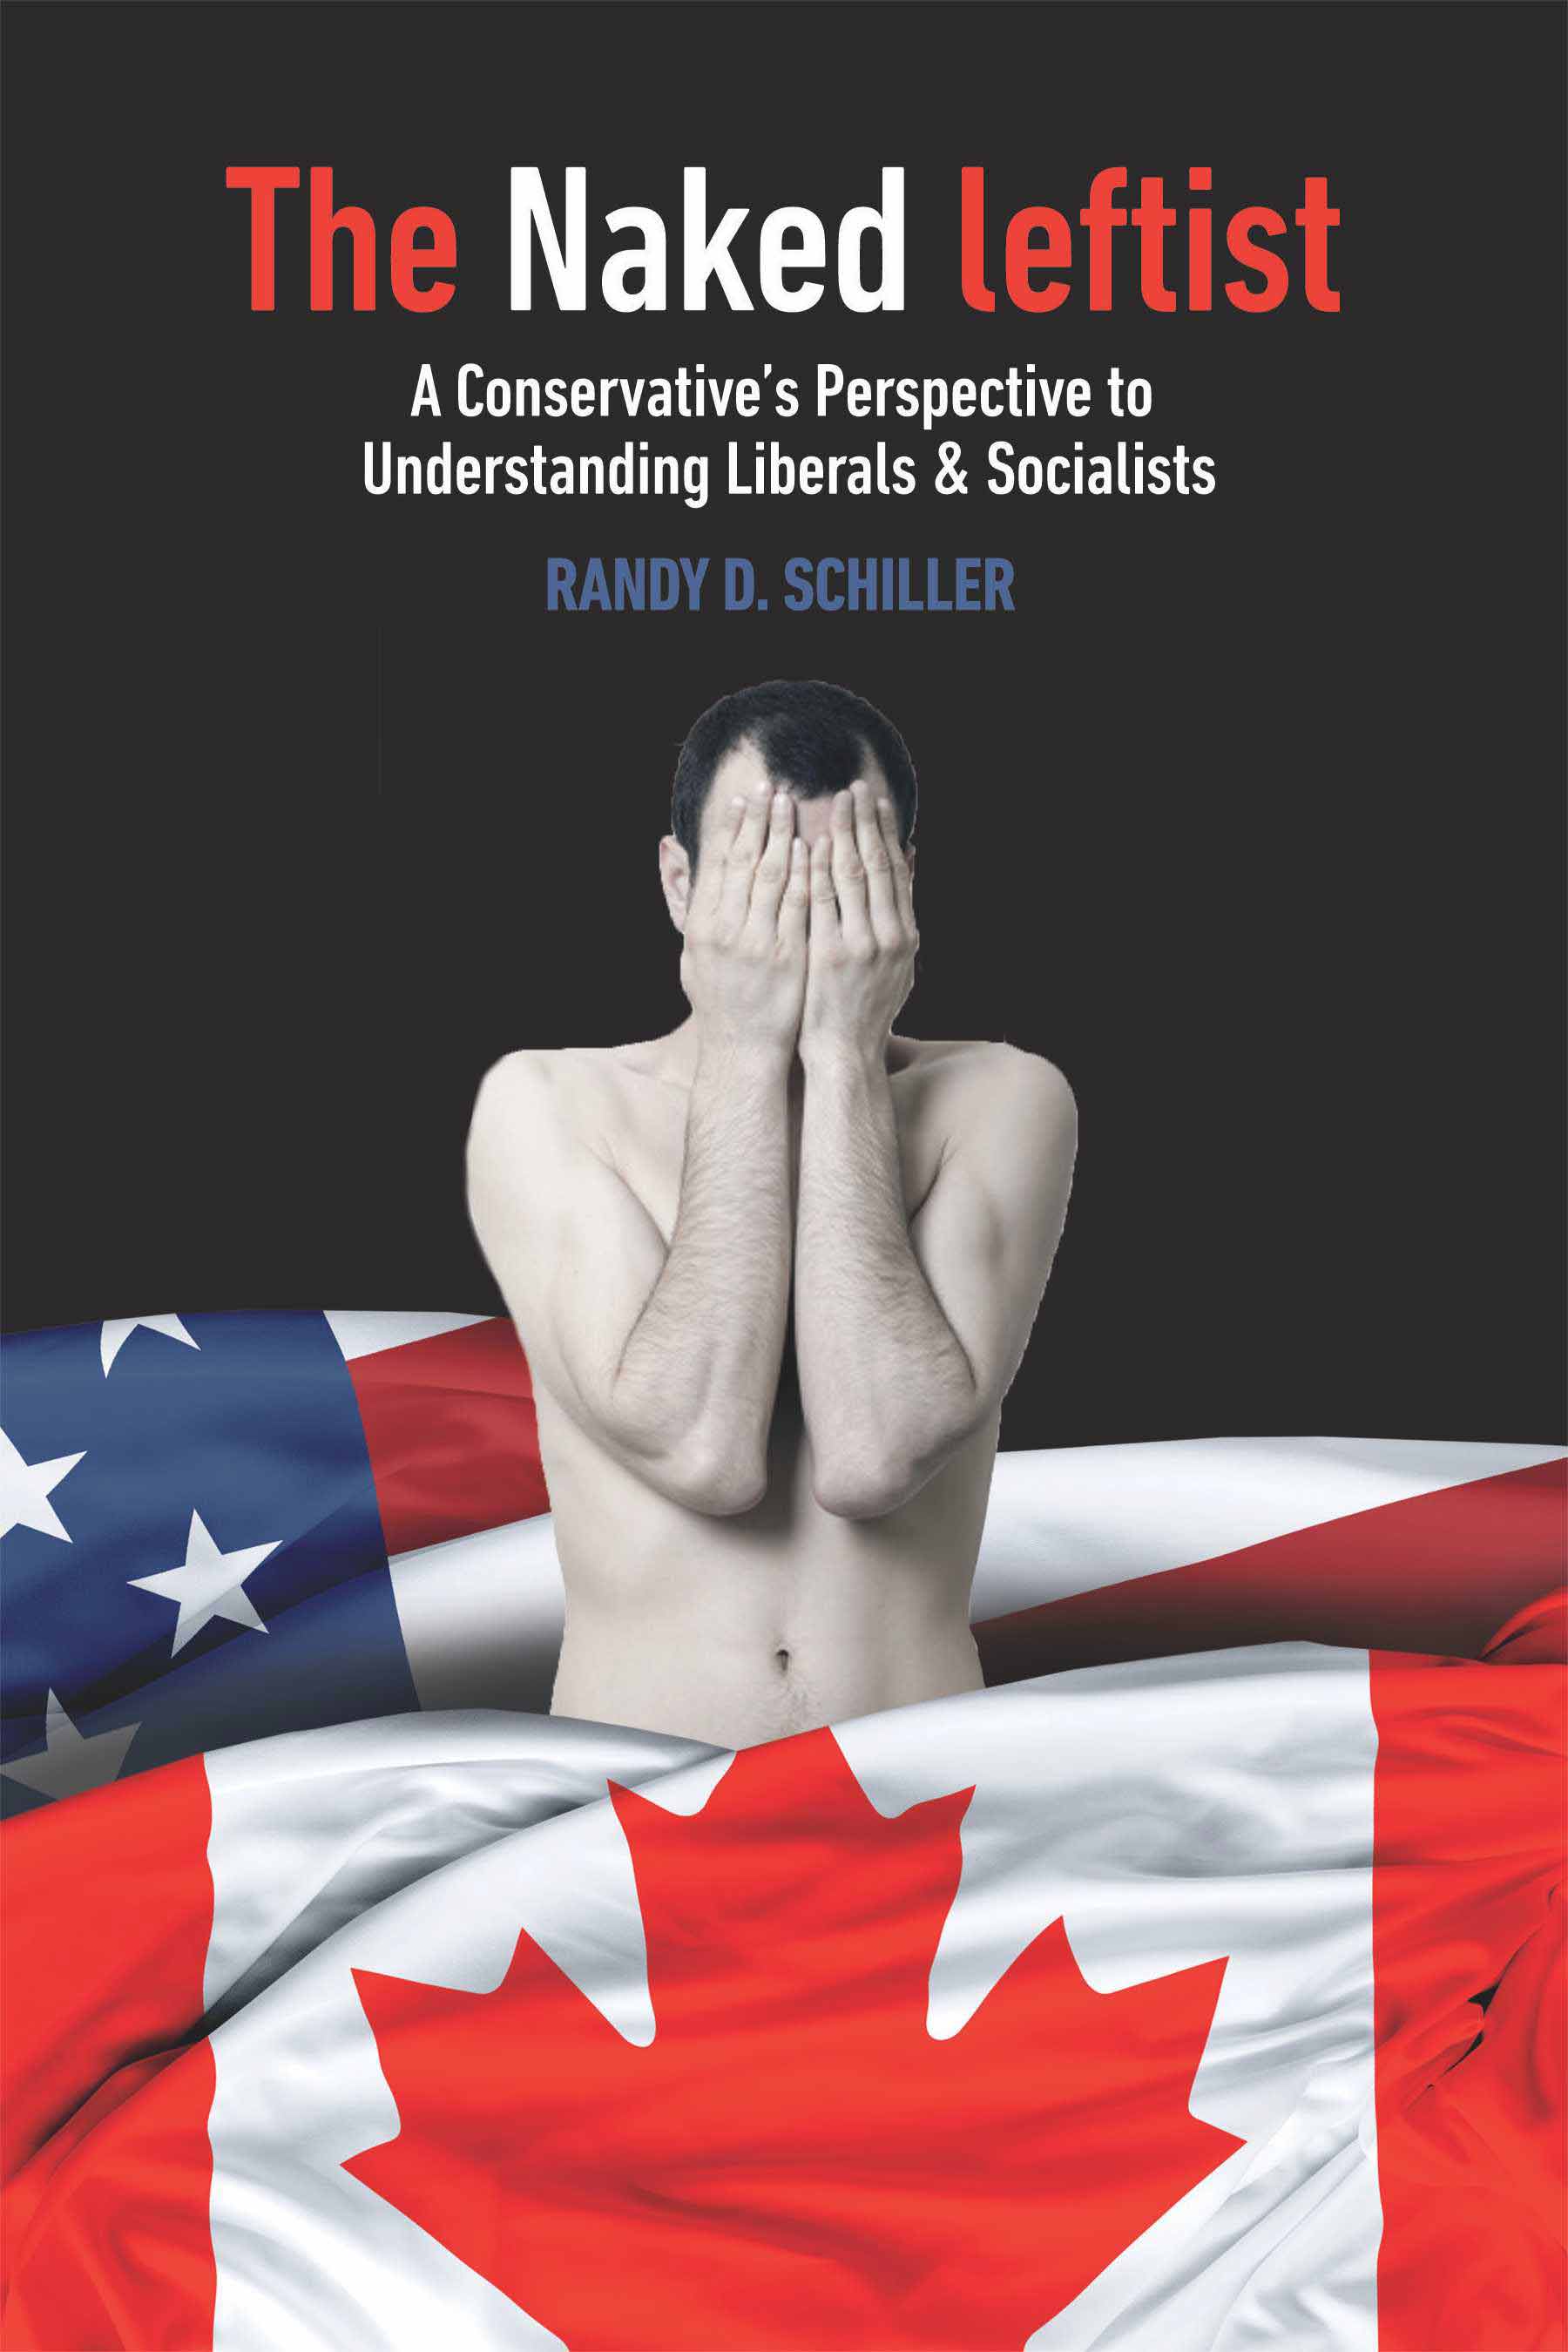 The Naked leftist: A Conservative's Perspective to Understanding Liberals & Socialists